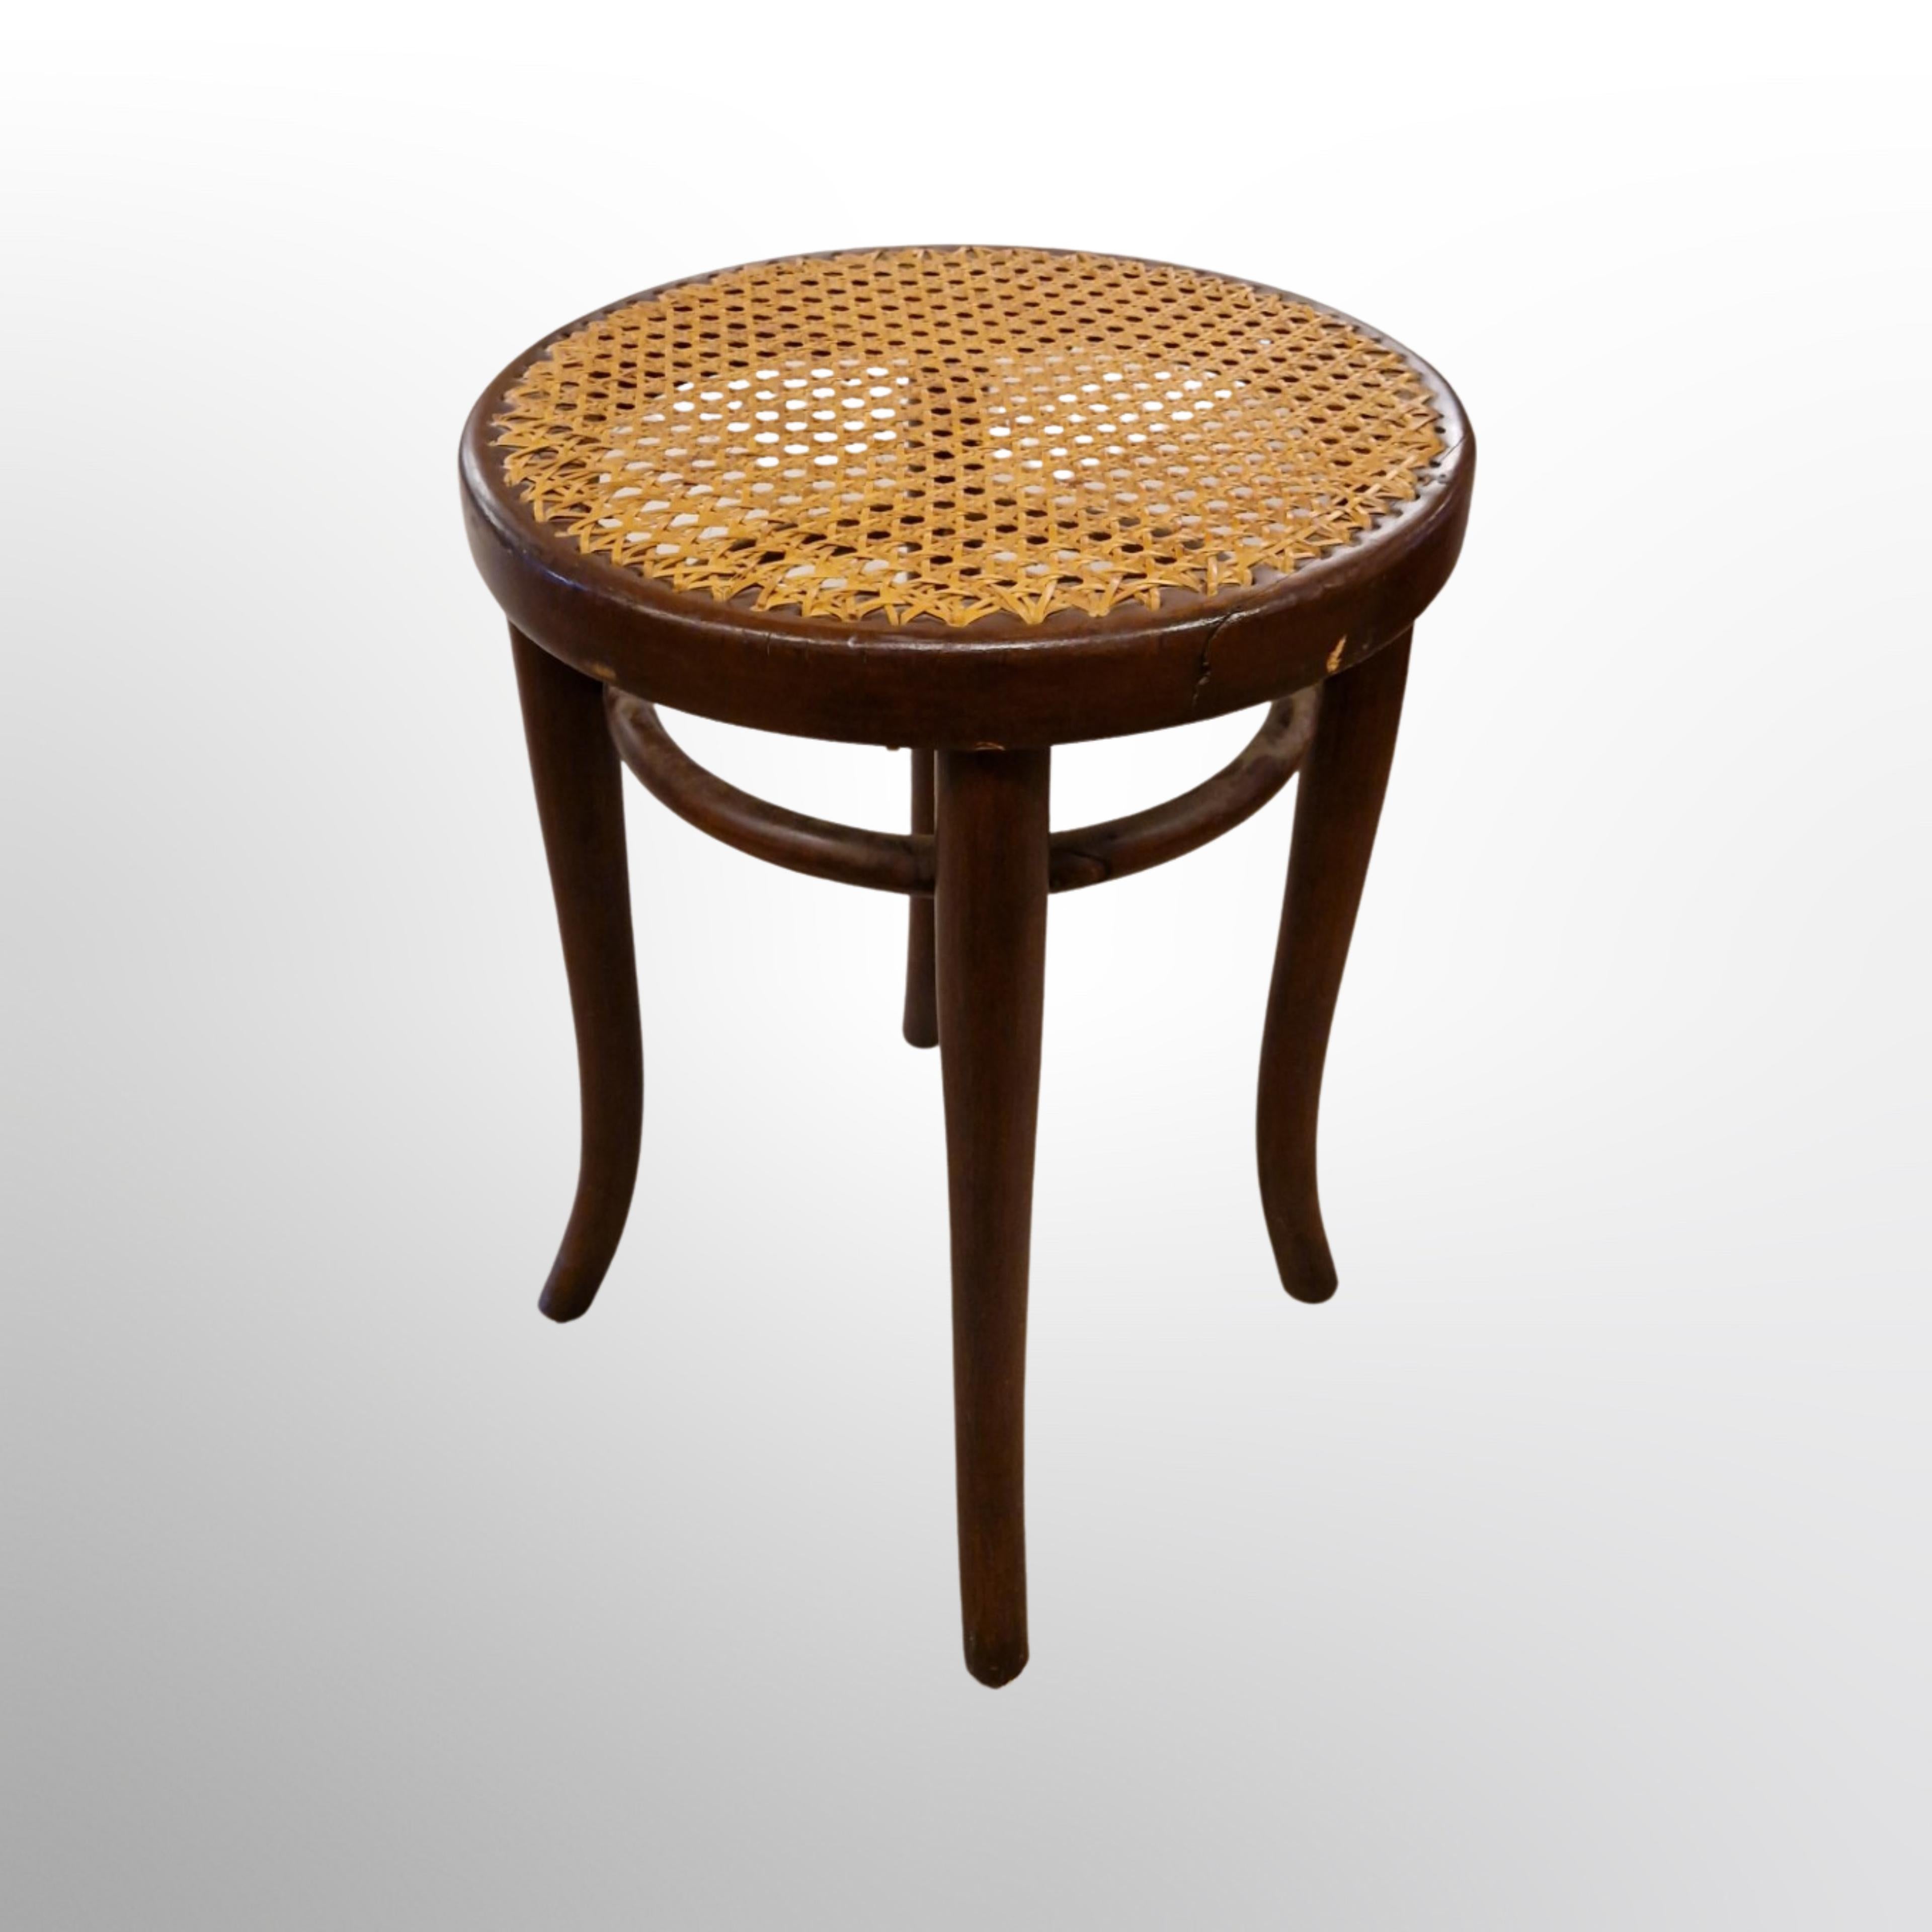 Vienna Secession Low bentwood stool with cane seat by Thonet, Austria 1920s For Sale